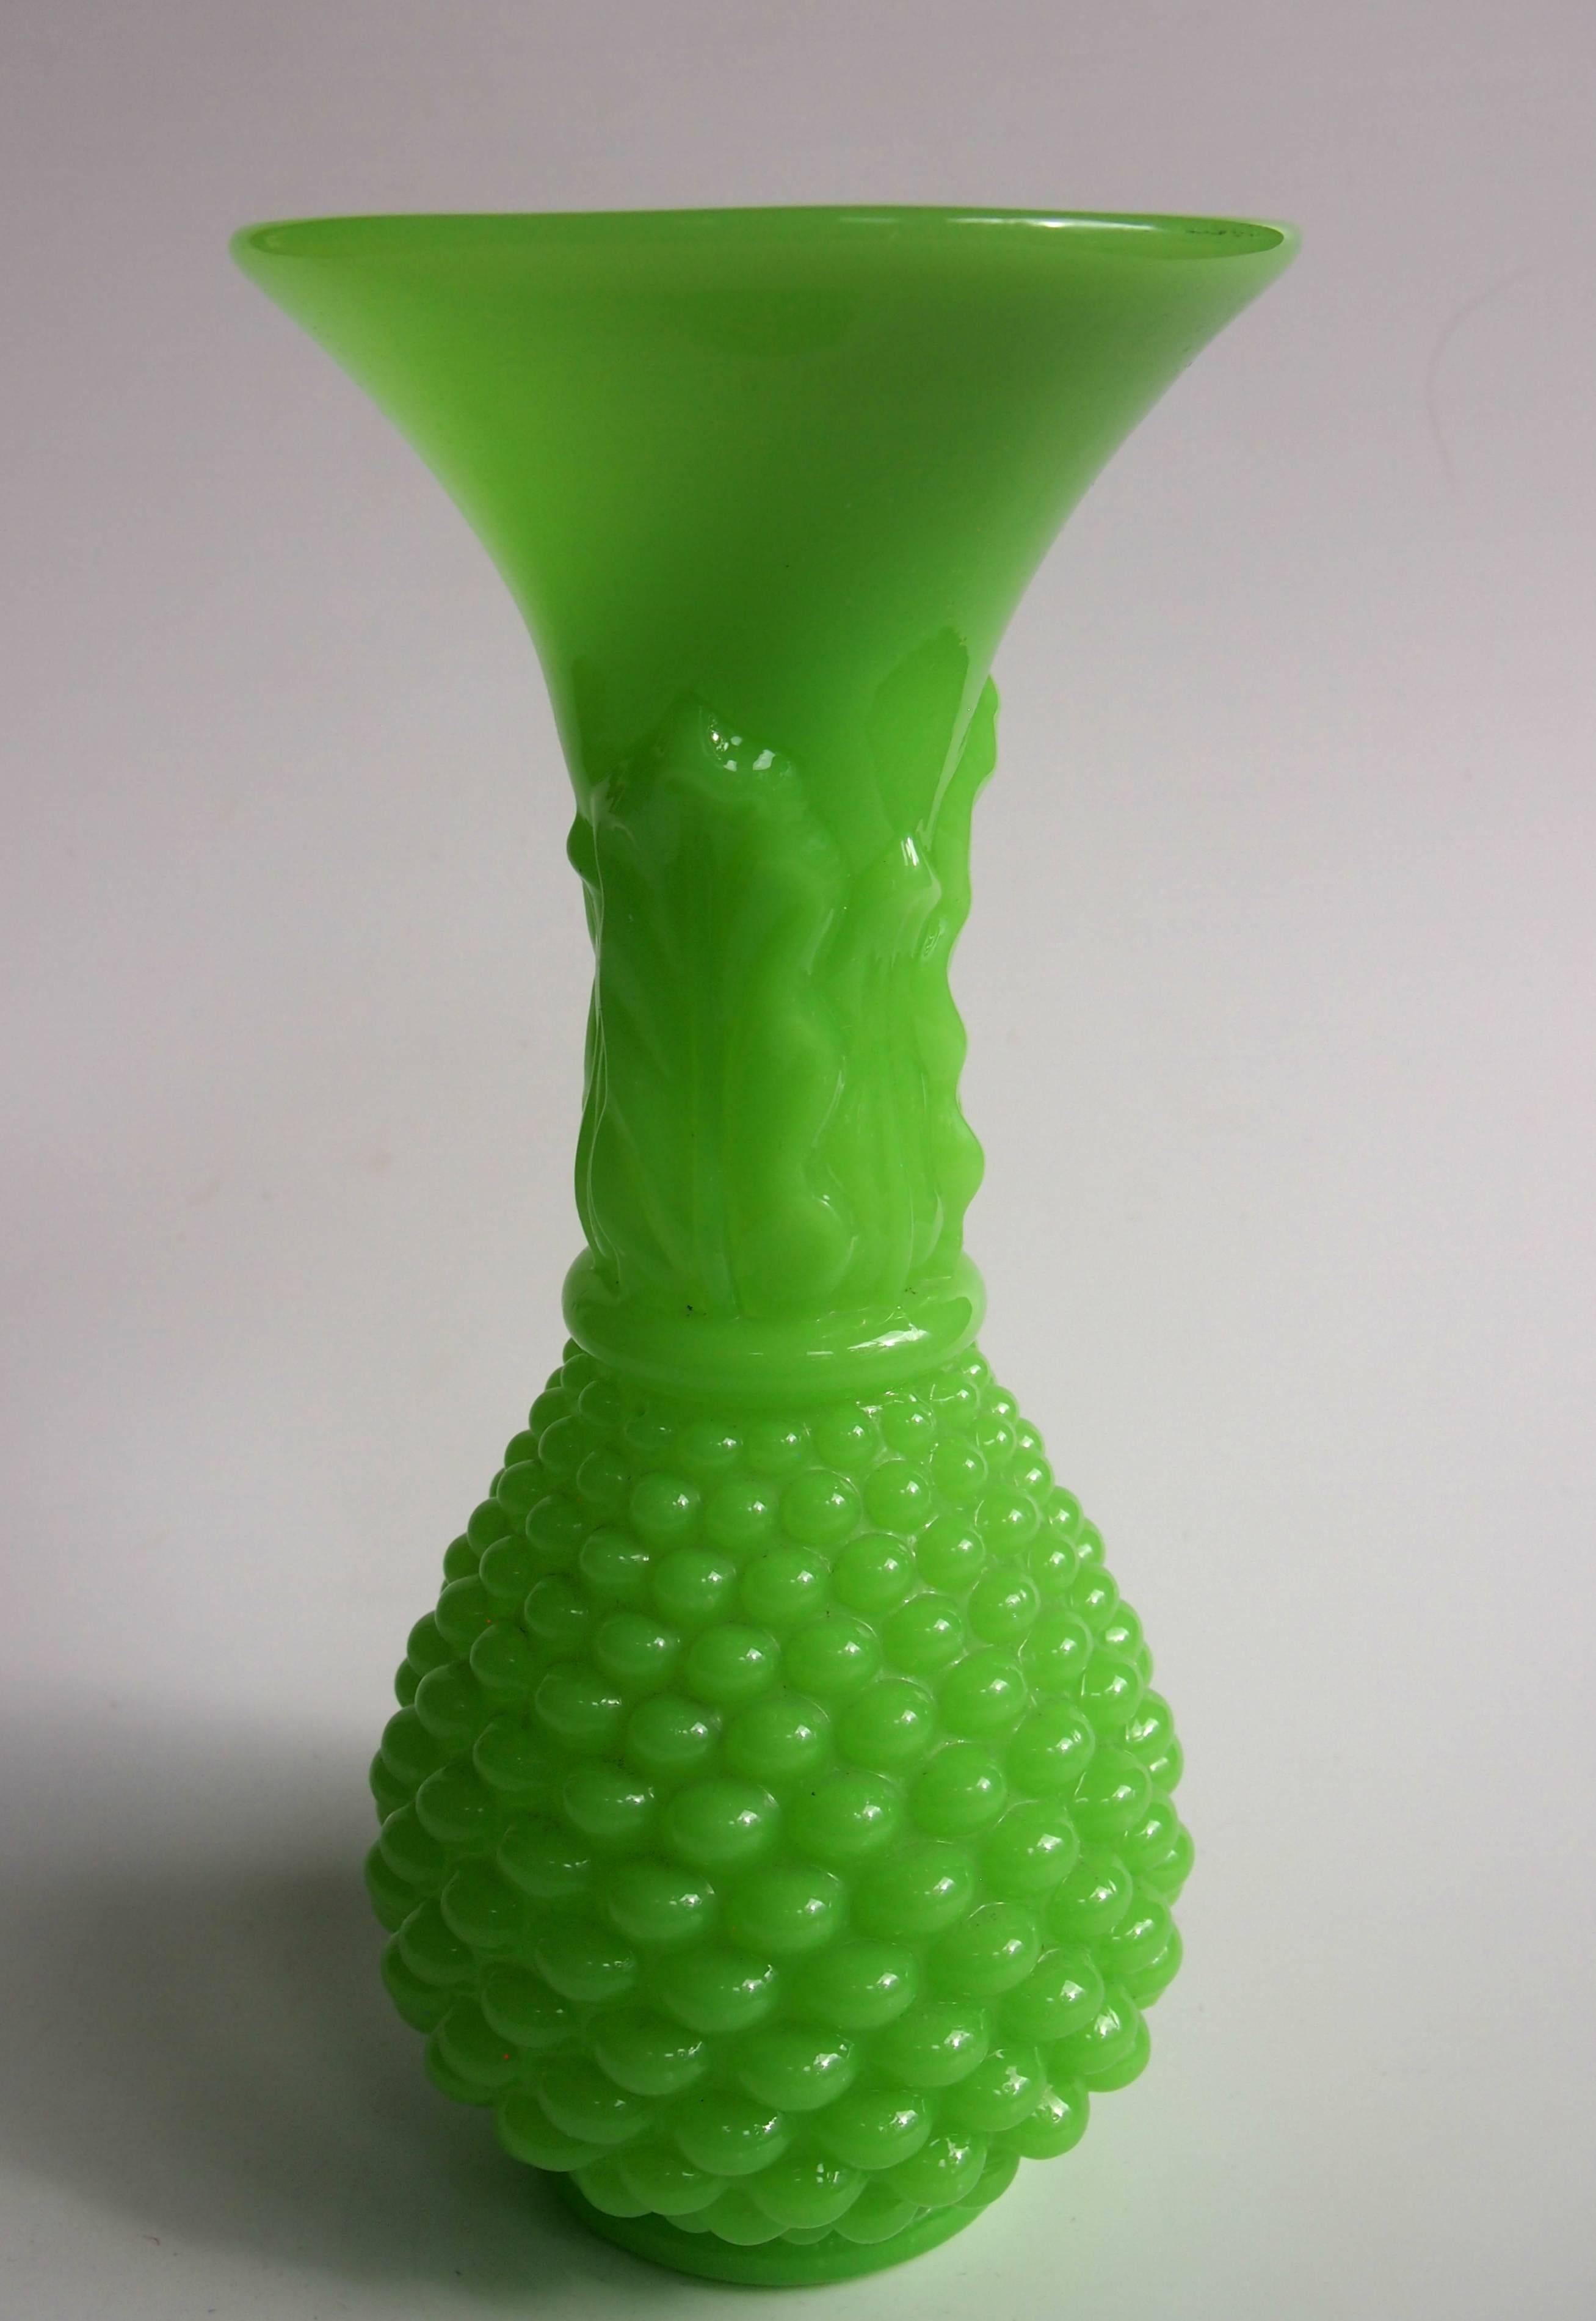 Classic Louis Philippe Baccarat Perroquet (literally parrot green) Pineapple vase with 'blind' decoration. According to references this style and color were first created at Baccarat in 1842 by Francois-Eugene de Fontenay.

Baccarat is, and has